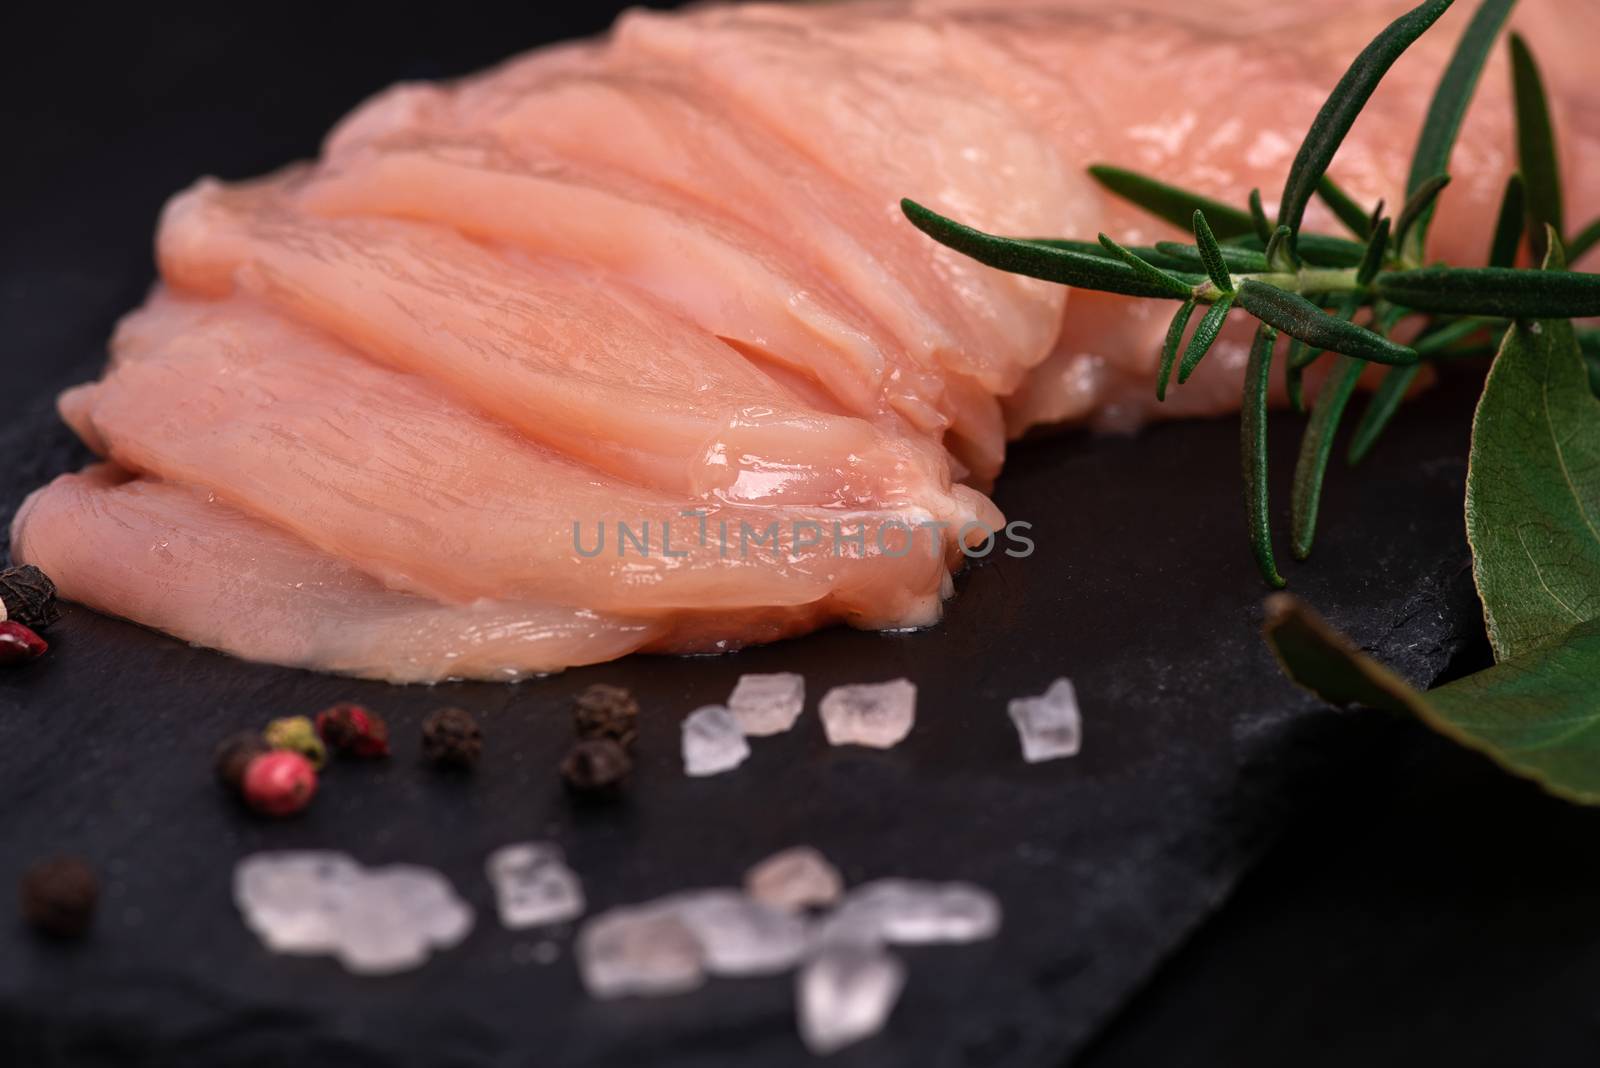 Raw chicken slices on a wooden table with spices. Satilisimo. Close-up view of raw, fresh, choped and sliced chicken meat. Delicious dietary meat.Top view. by nkooume